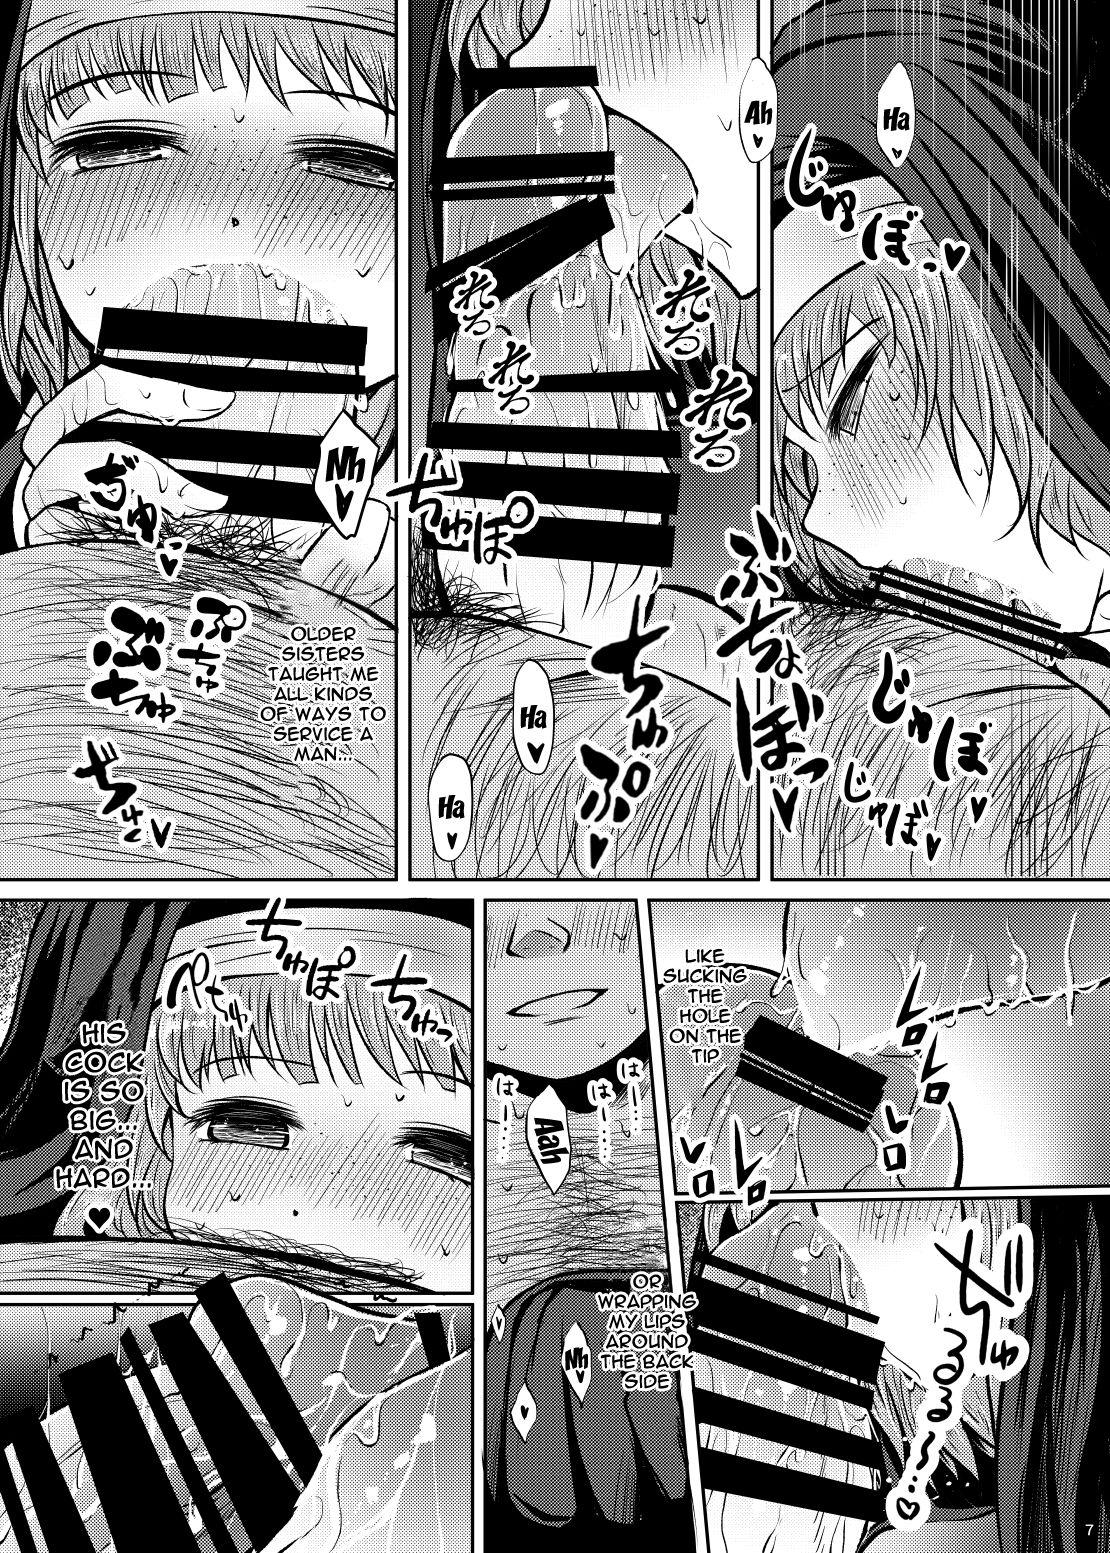 Sapphic Shouginka 10-mai Yadodai Betsu | Paying For Something a Little Extra To Go With The 10 Silver Hotel Room - Original Pussy - Page 6